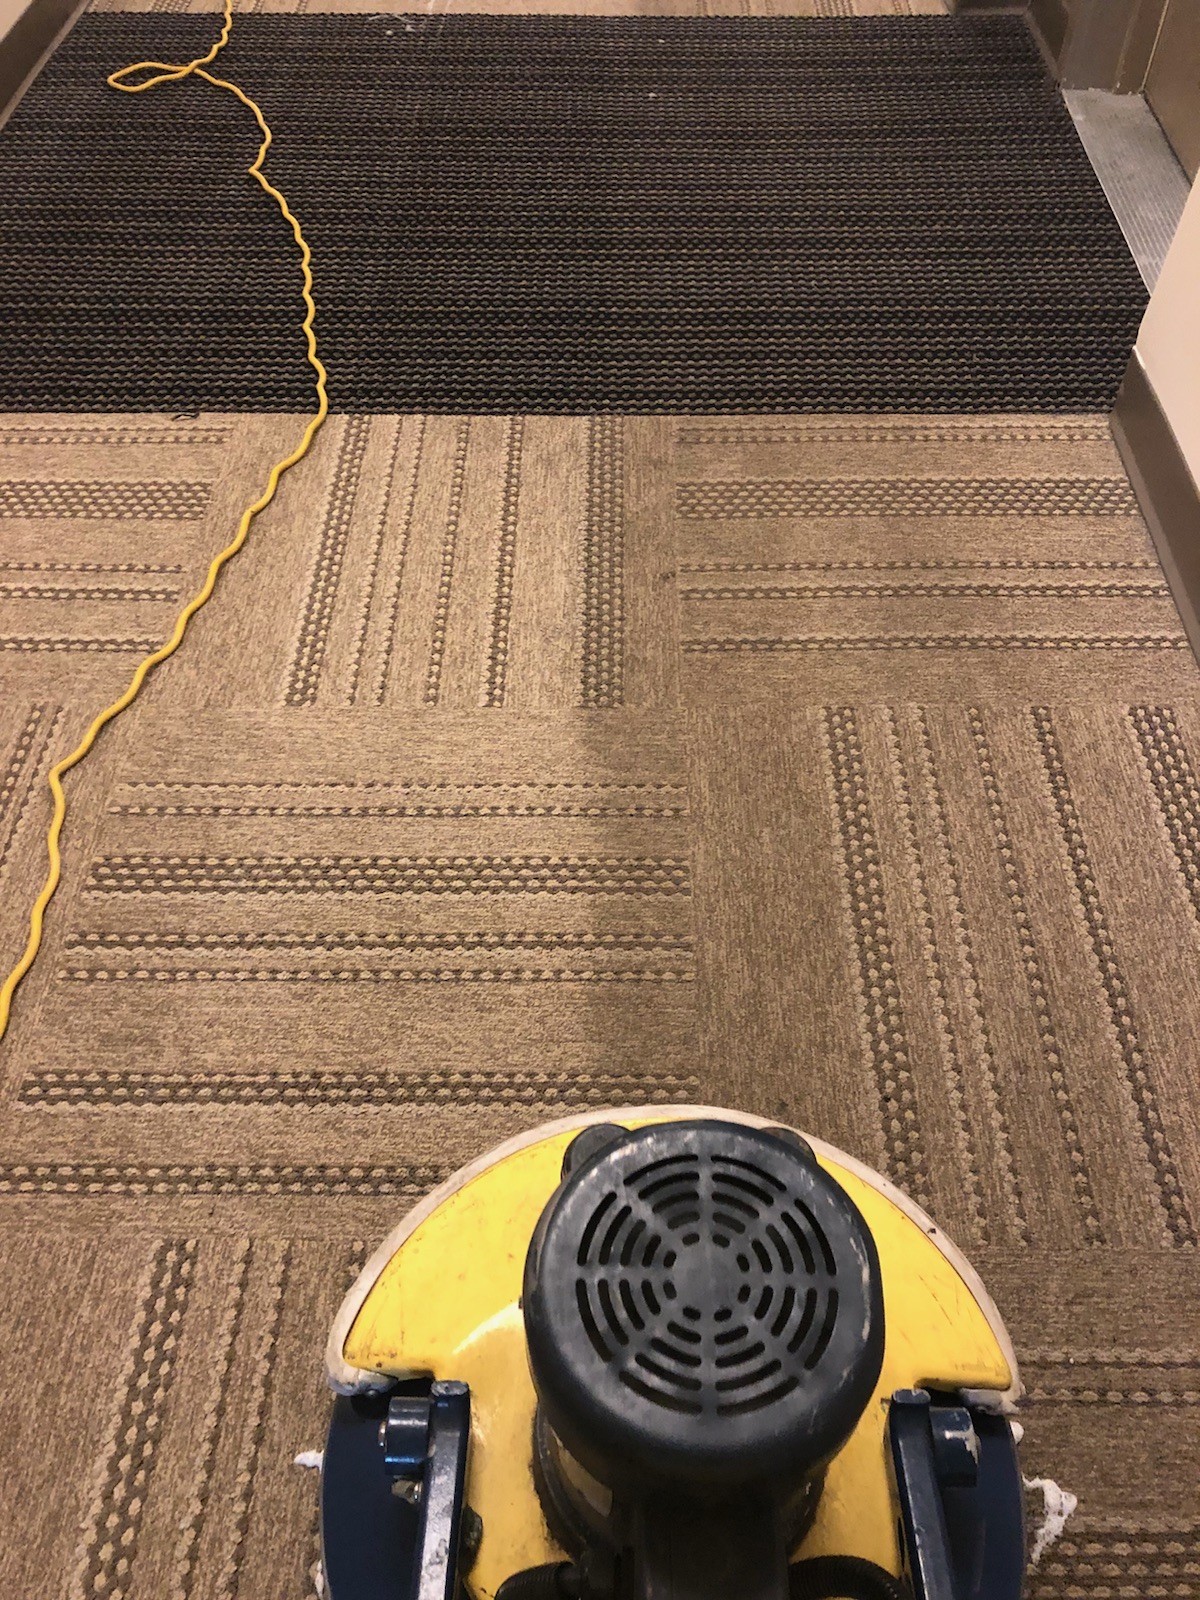 Professional Carpet Cleaning Anderson Ohio by Howards Cleaning Service